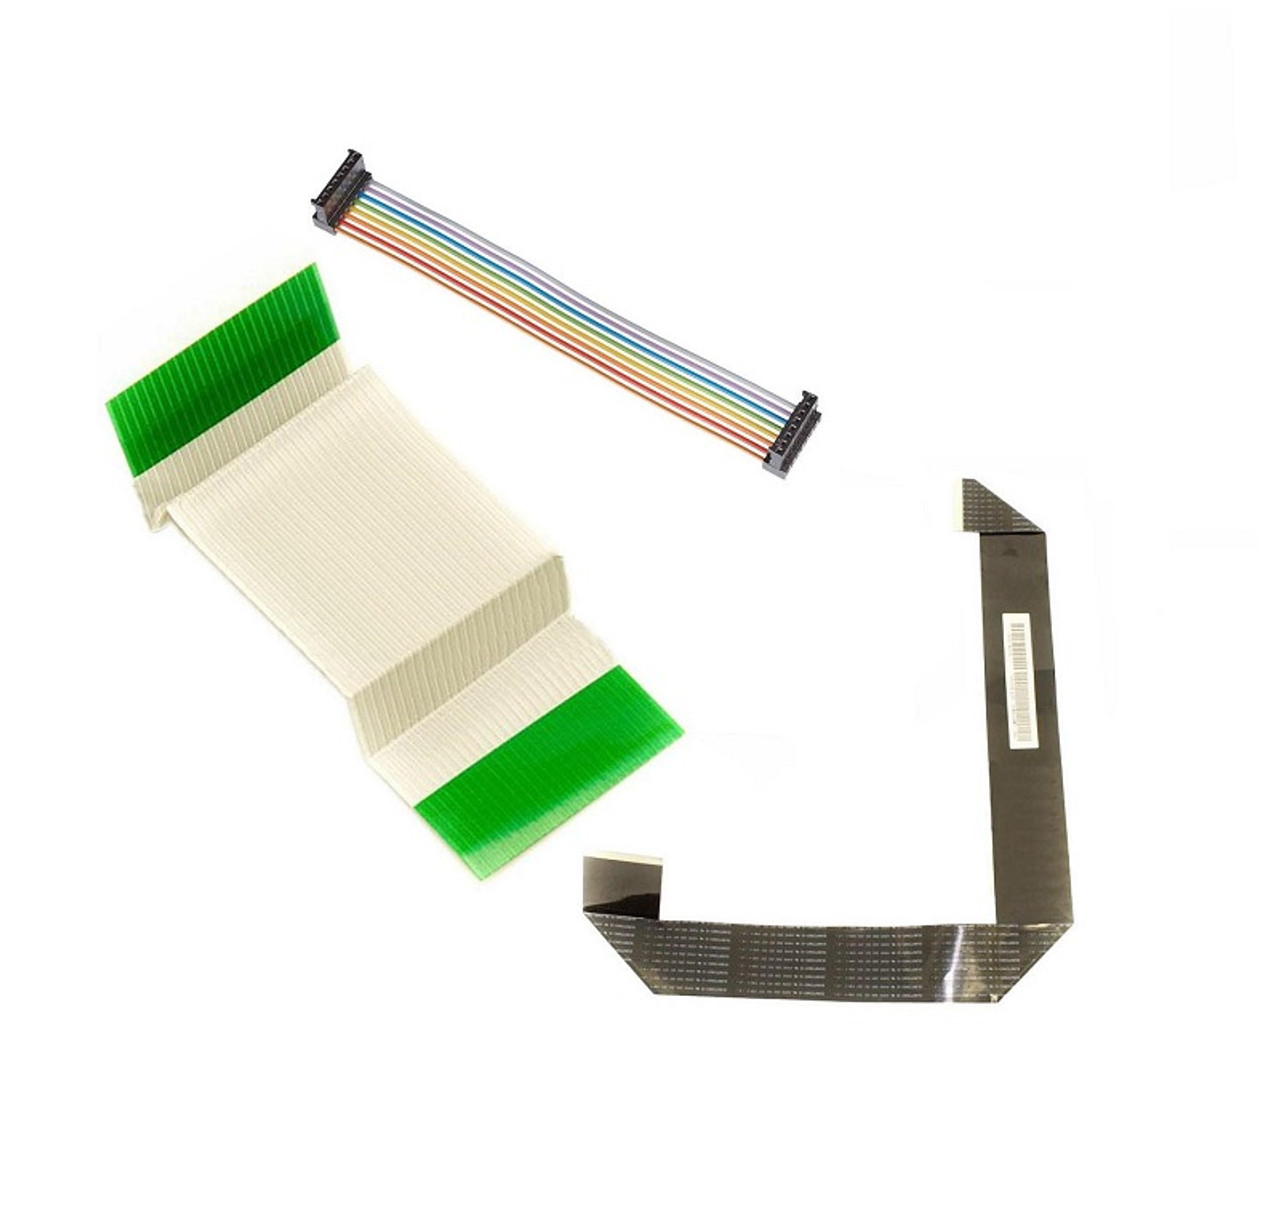 RM1-4054 - HP Memory Tag Cartridge - Contacts and Cable for LJ P3005 Series